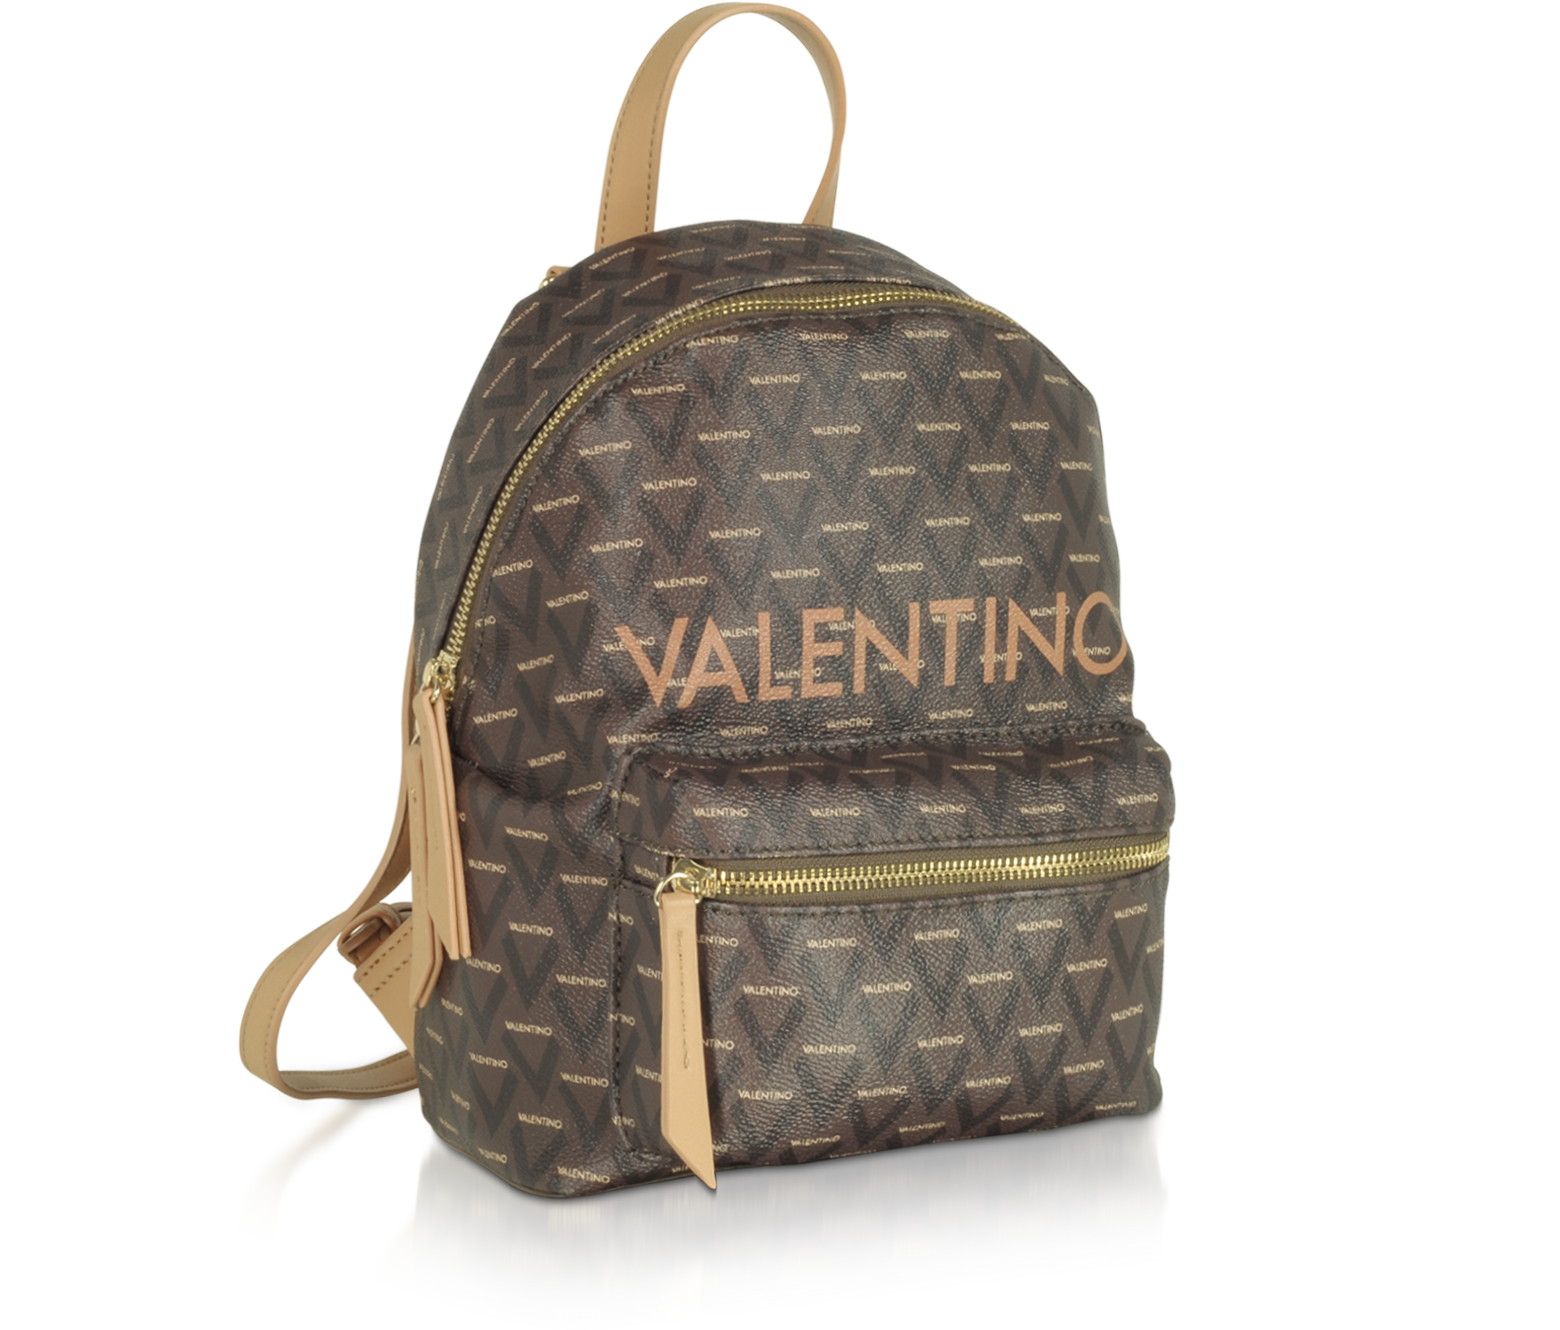 VALENTINO backpack Colada Backpack Camel, Buy bags, purses & accessories  online